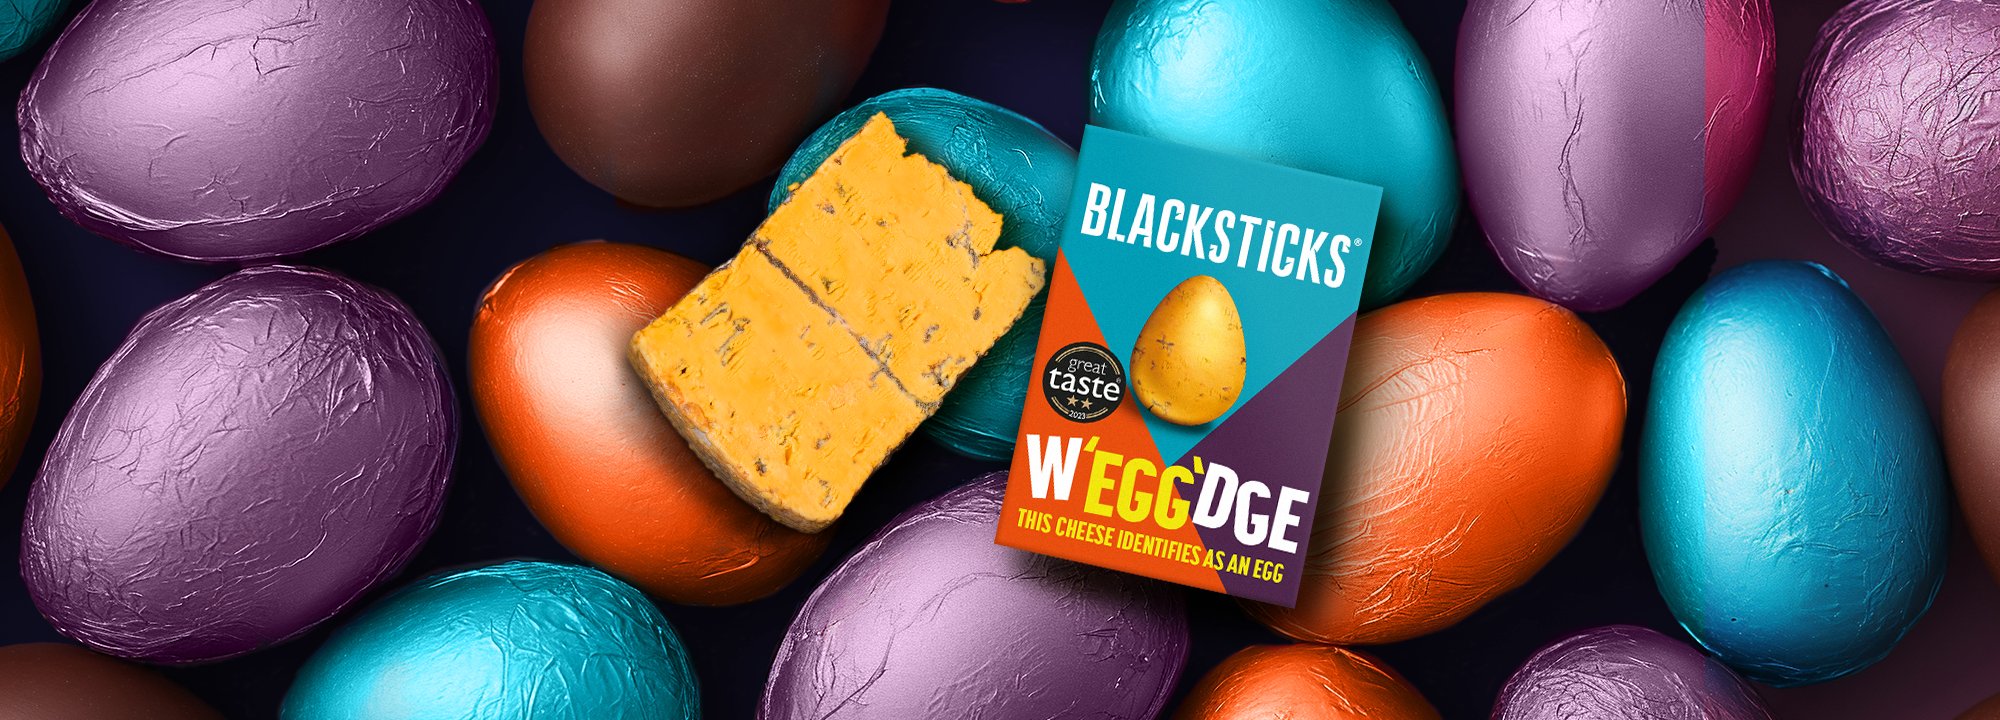 Easter eggs in background with a wedge of Blackstick blue cheese on top and W'egg'dge packaging.s 